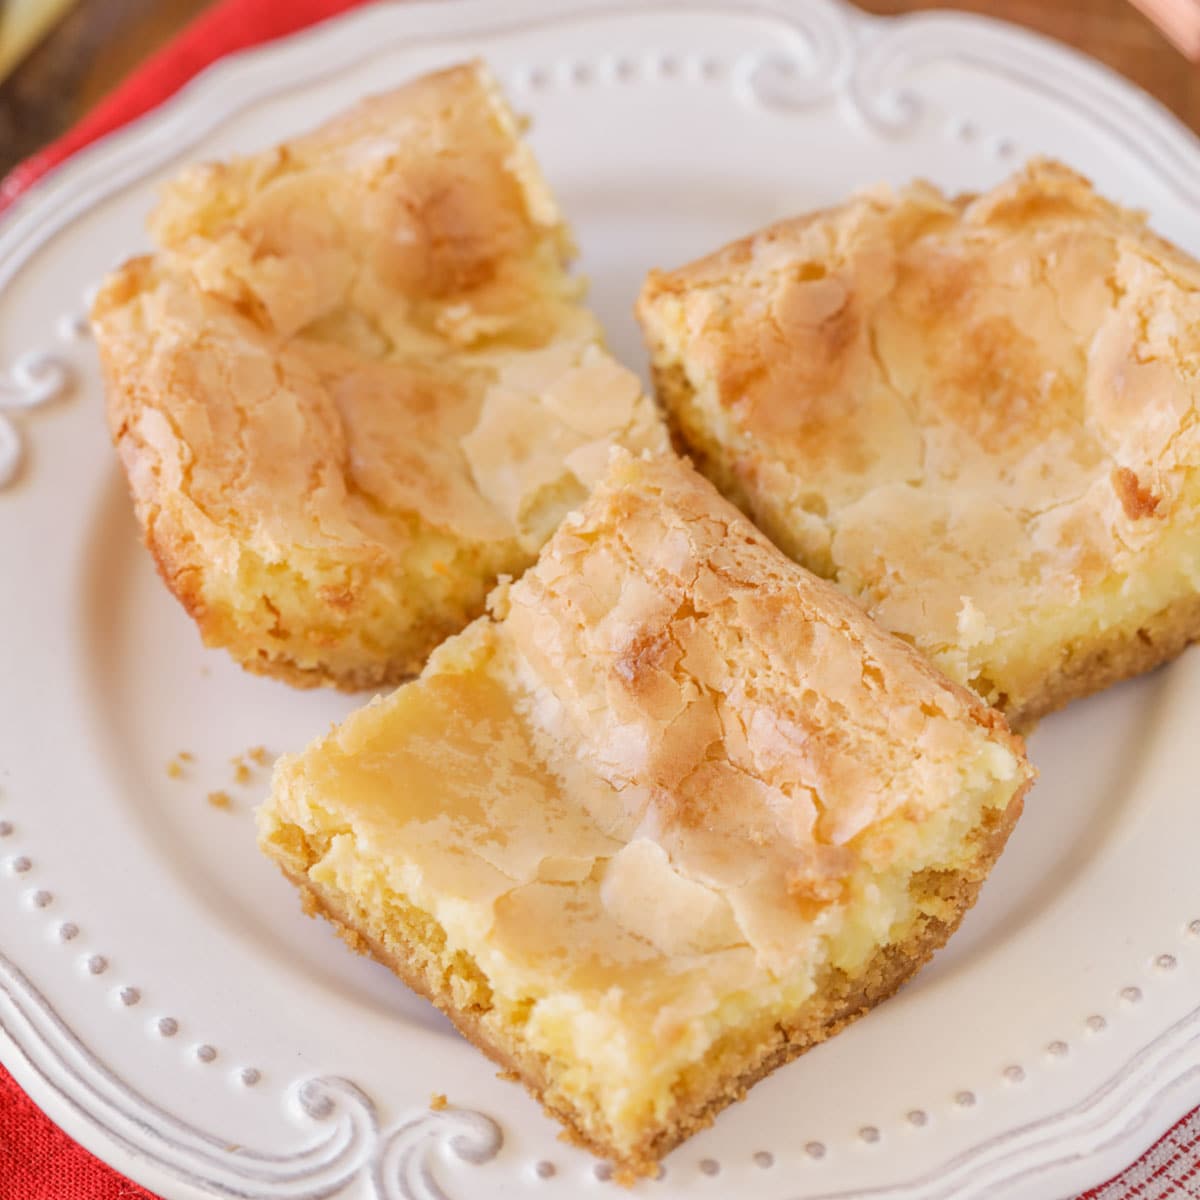 Three slices of gooey butter cake on a white plate